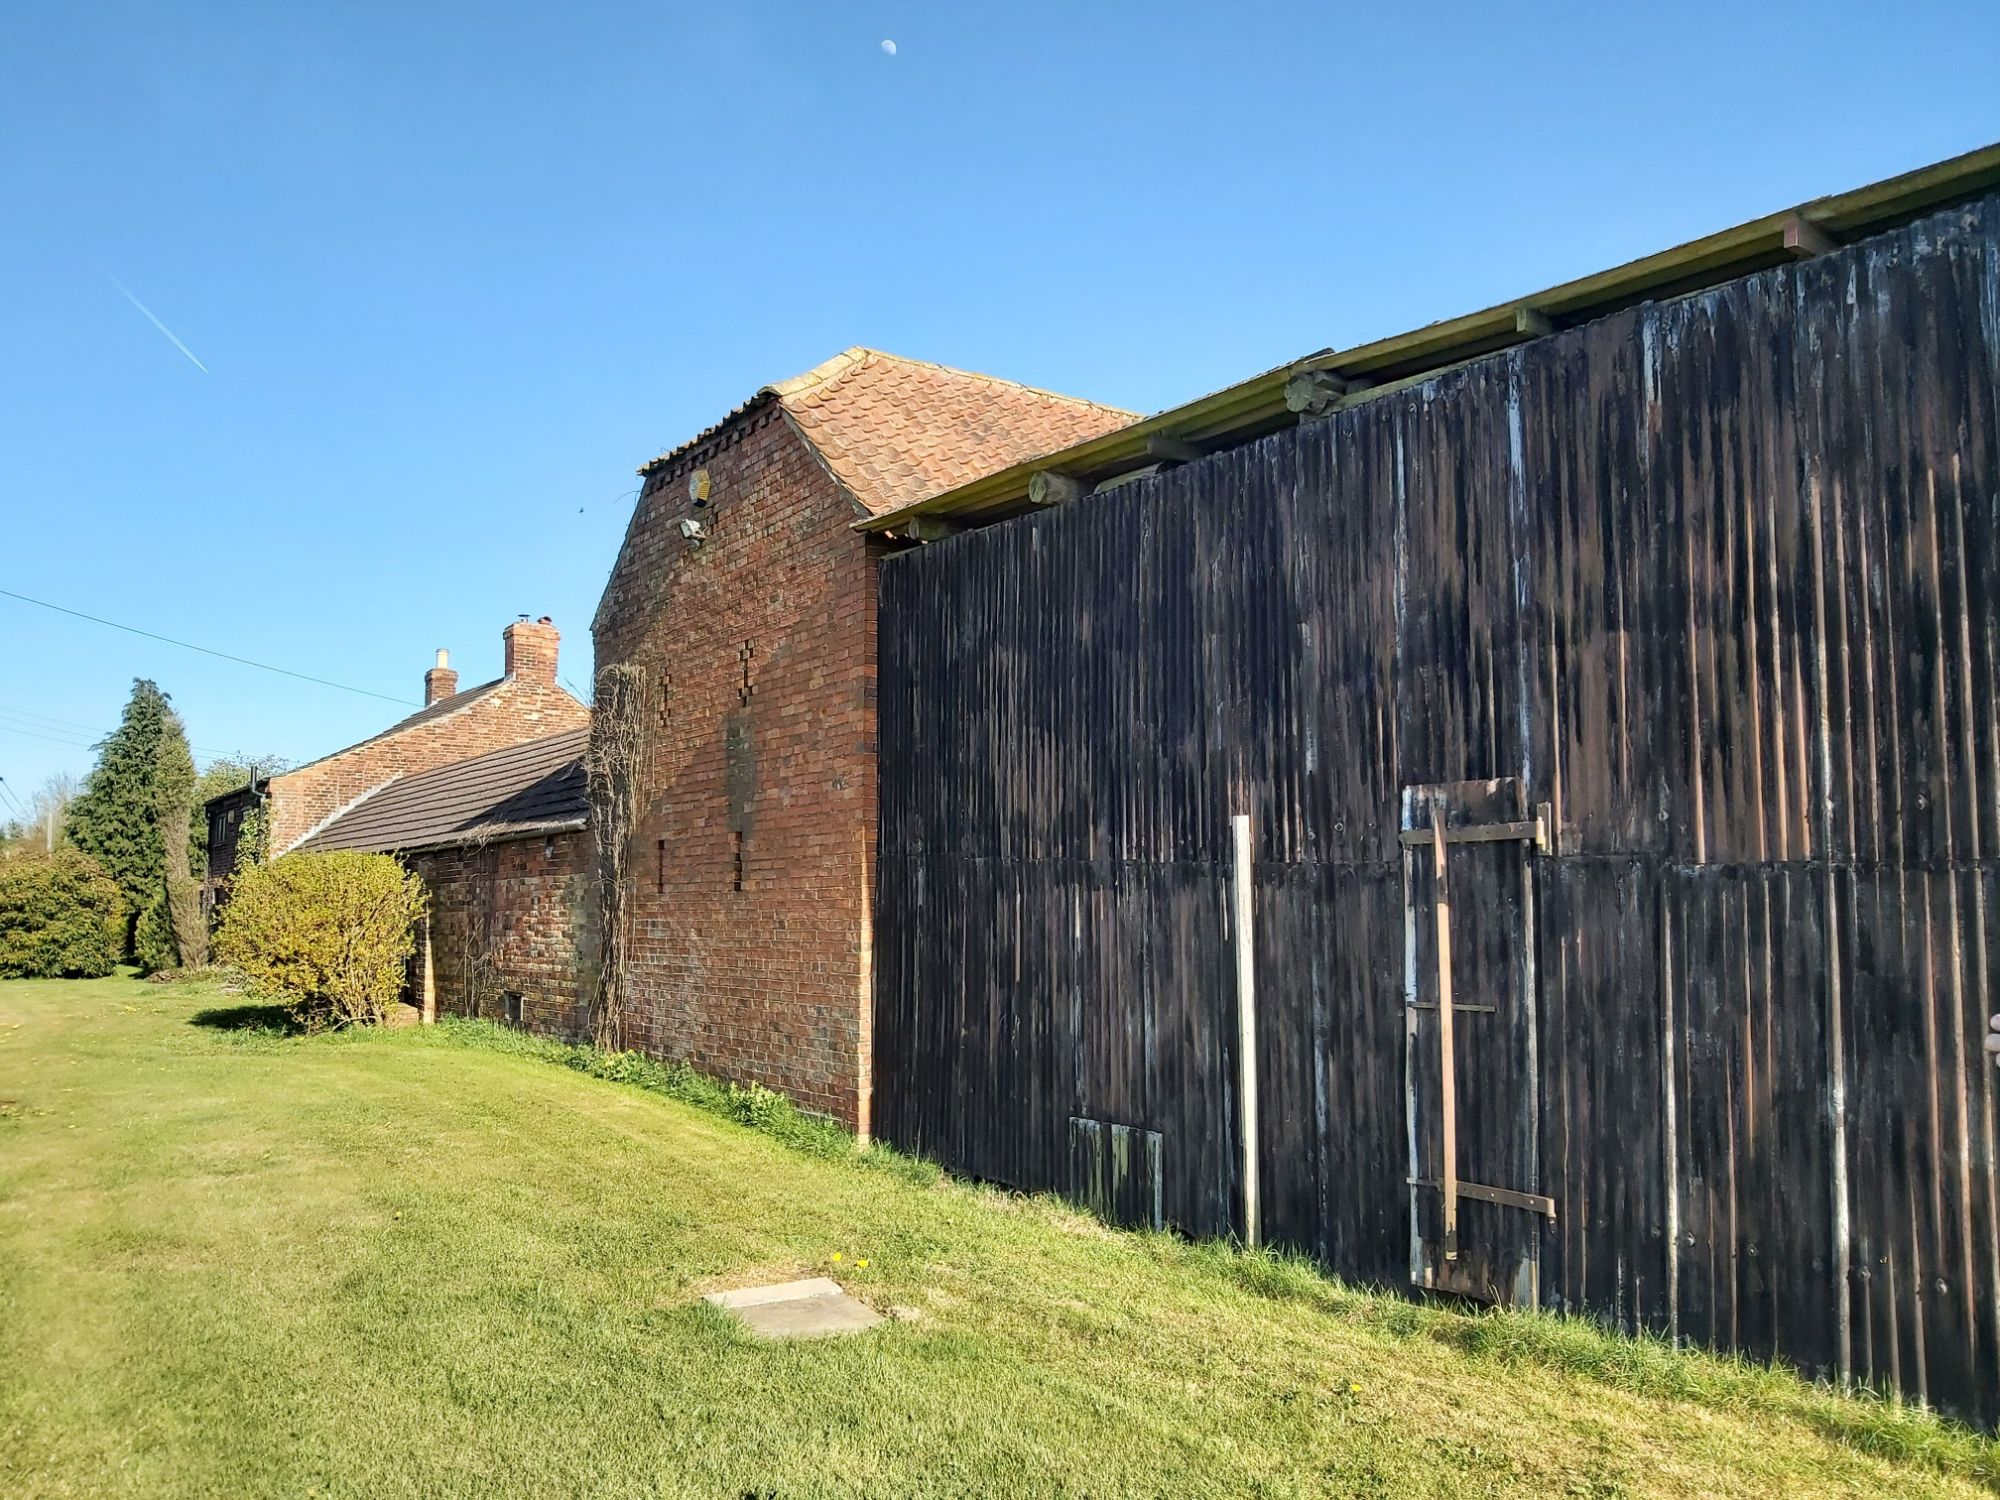 Planning Approved! Barn conversion to residential, plus agricultural buildings, workshops & more - South Clifton | Nottinghamshire 